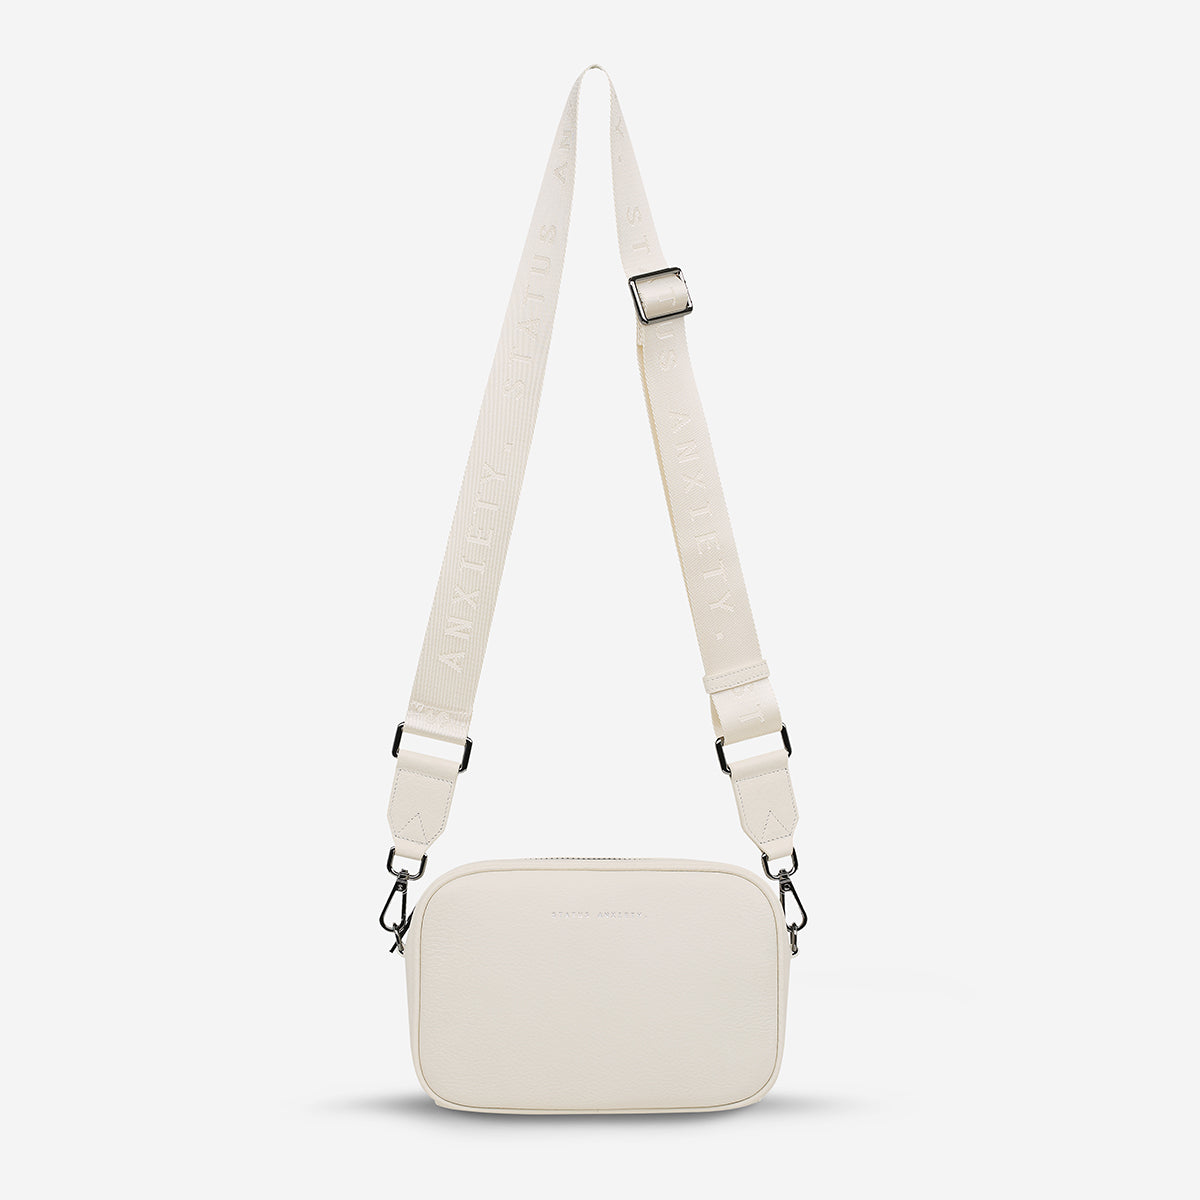 Plunder with Webbed Strap - Chalk